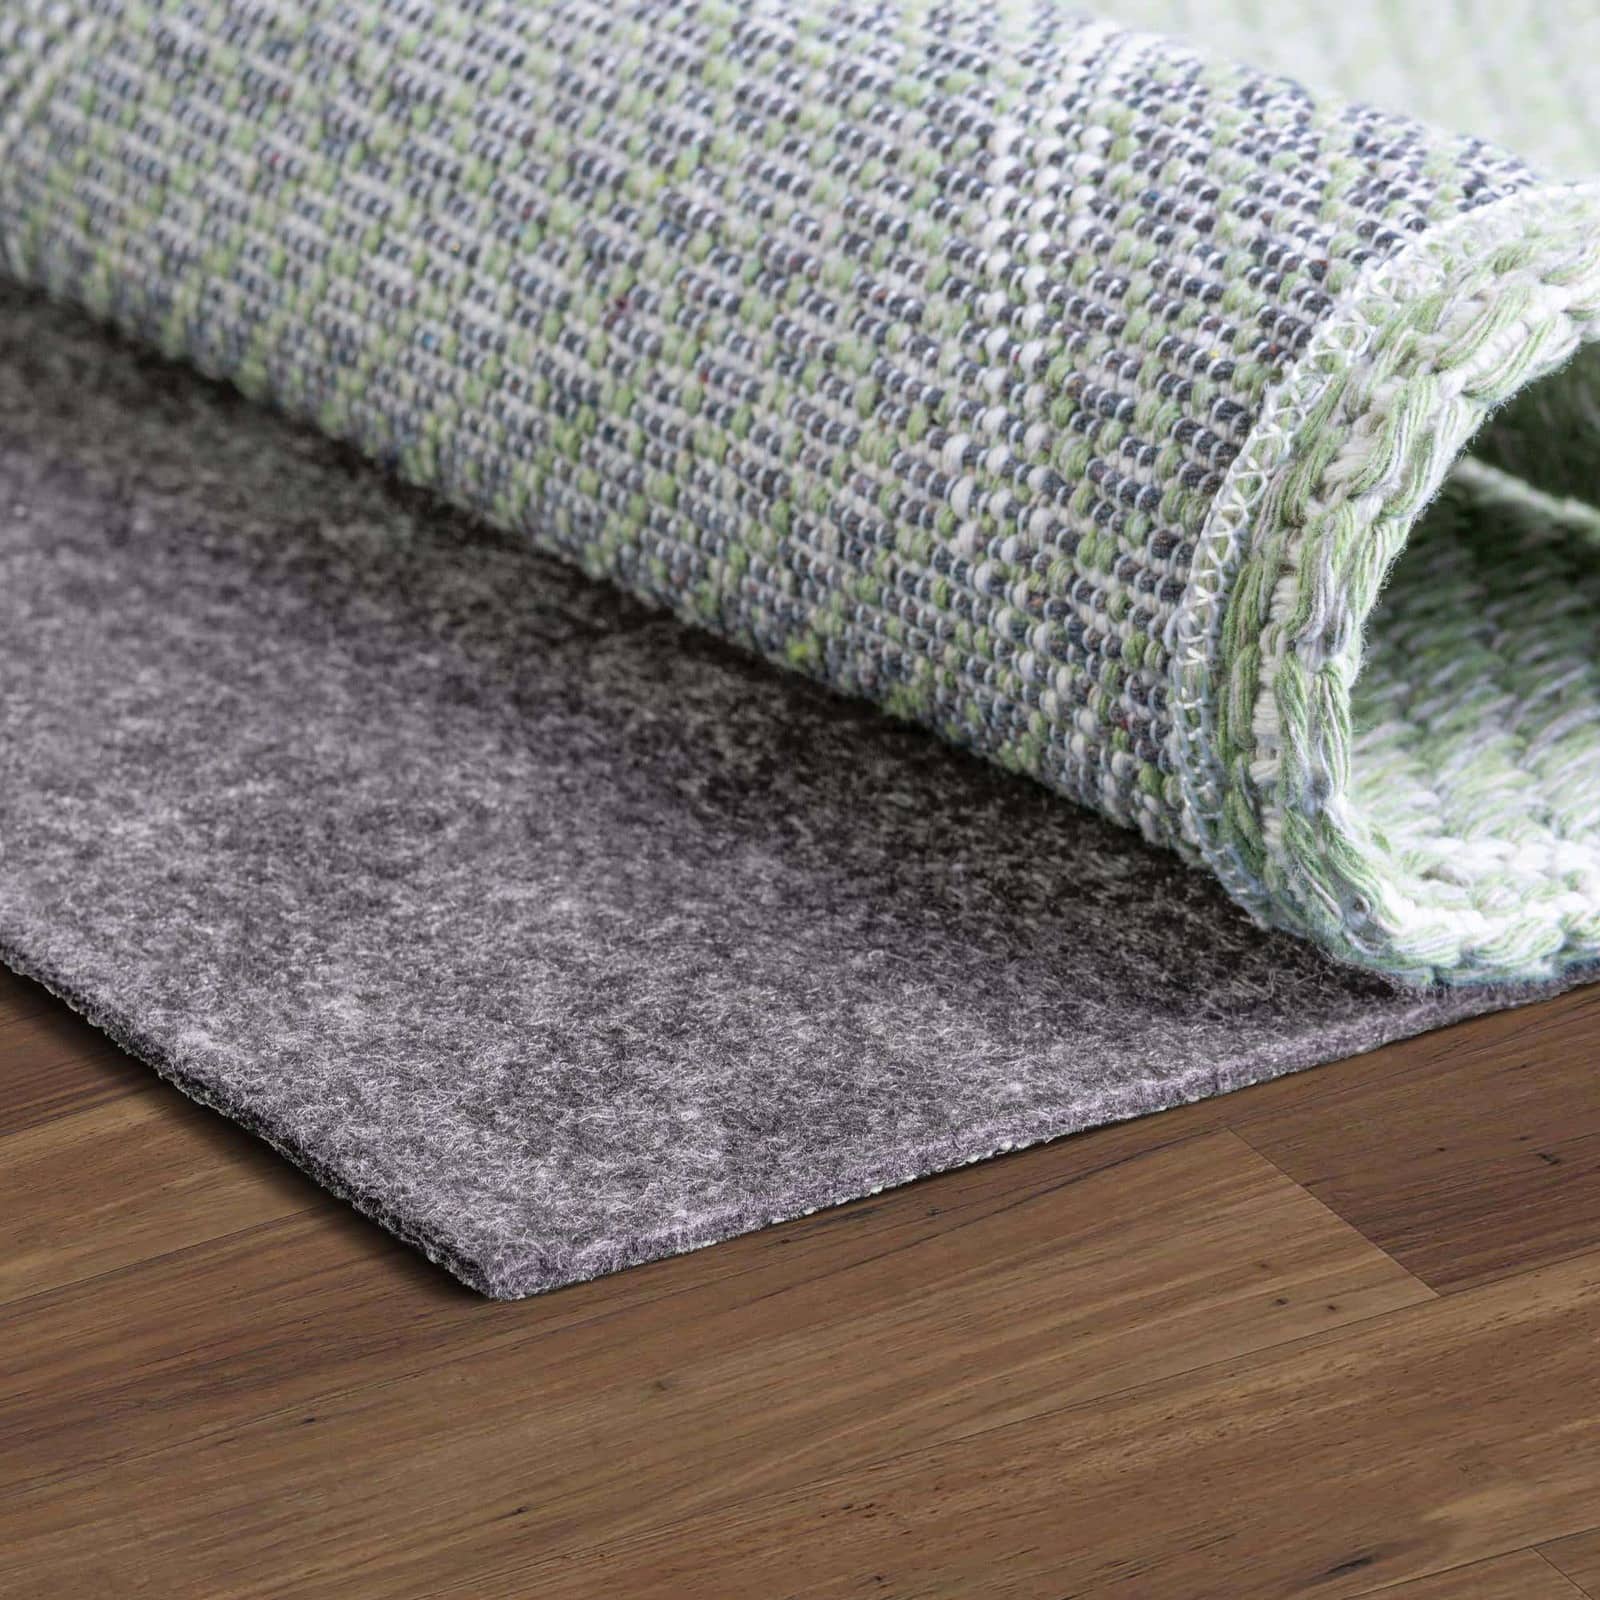 The 12 Best Rug Pads For Hardwood Floors, The Best Rug Pads For Hardwood Floors